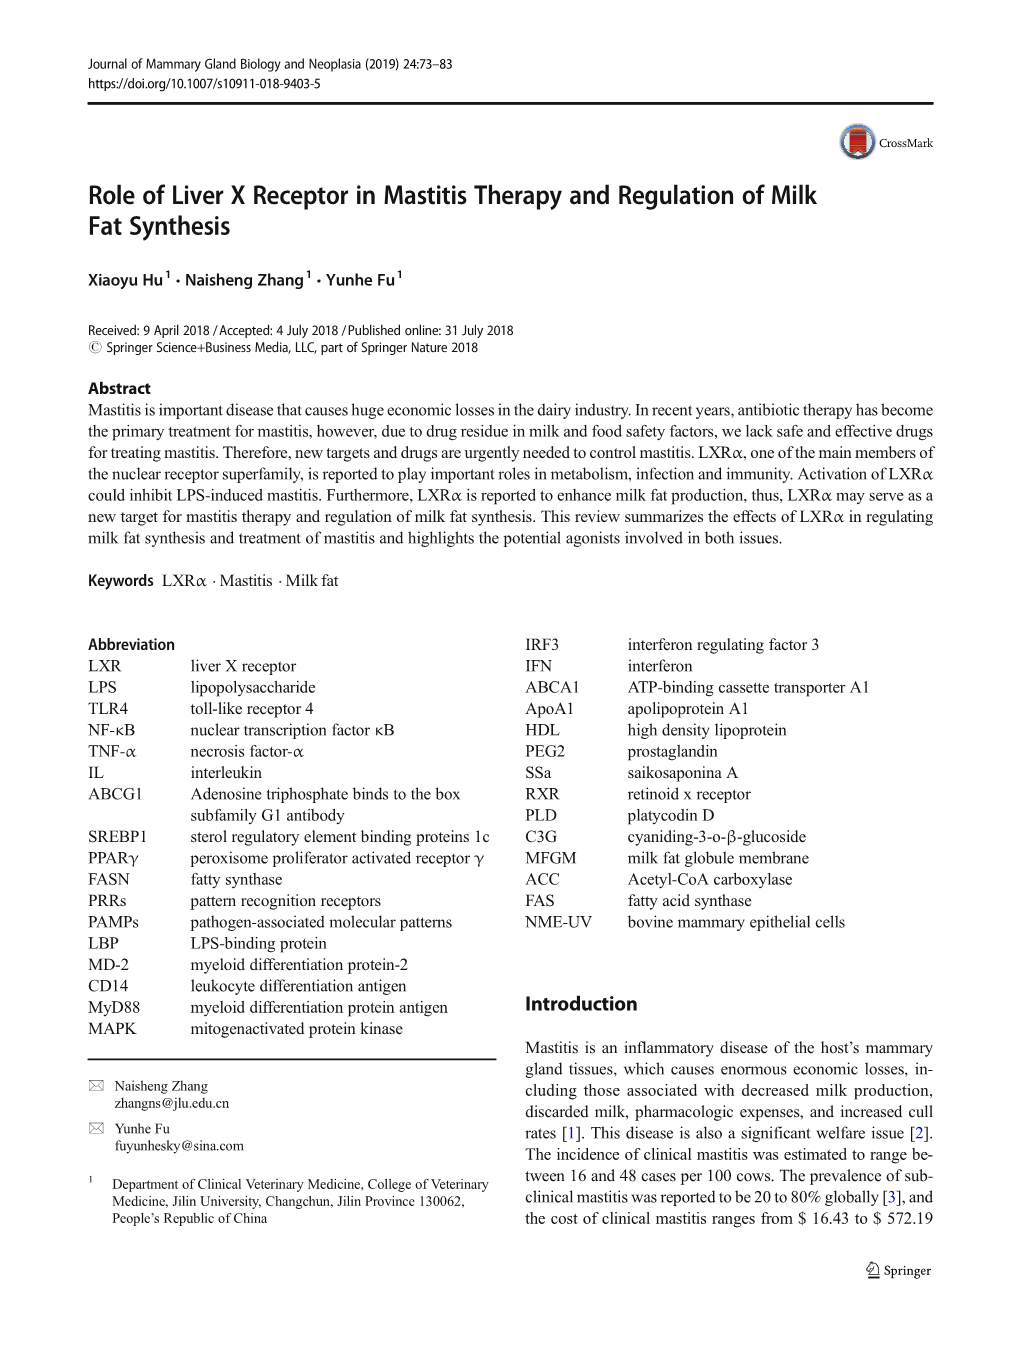 Role of Liver X Receptor in Mastitis Therapy and Regulation of Milk Fat Synthesis